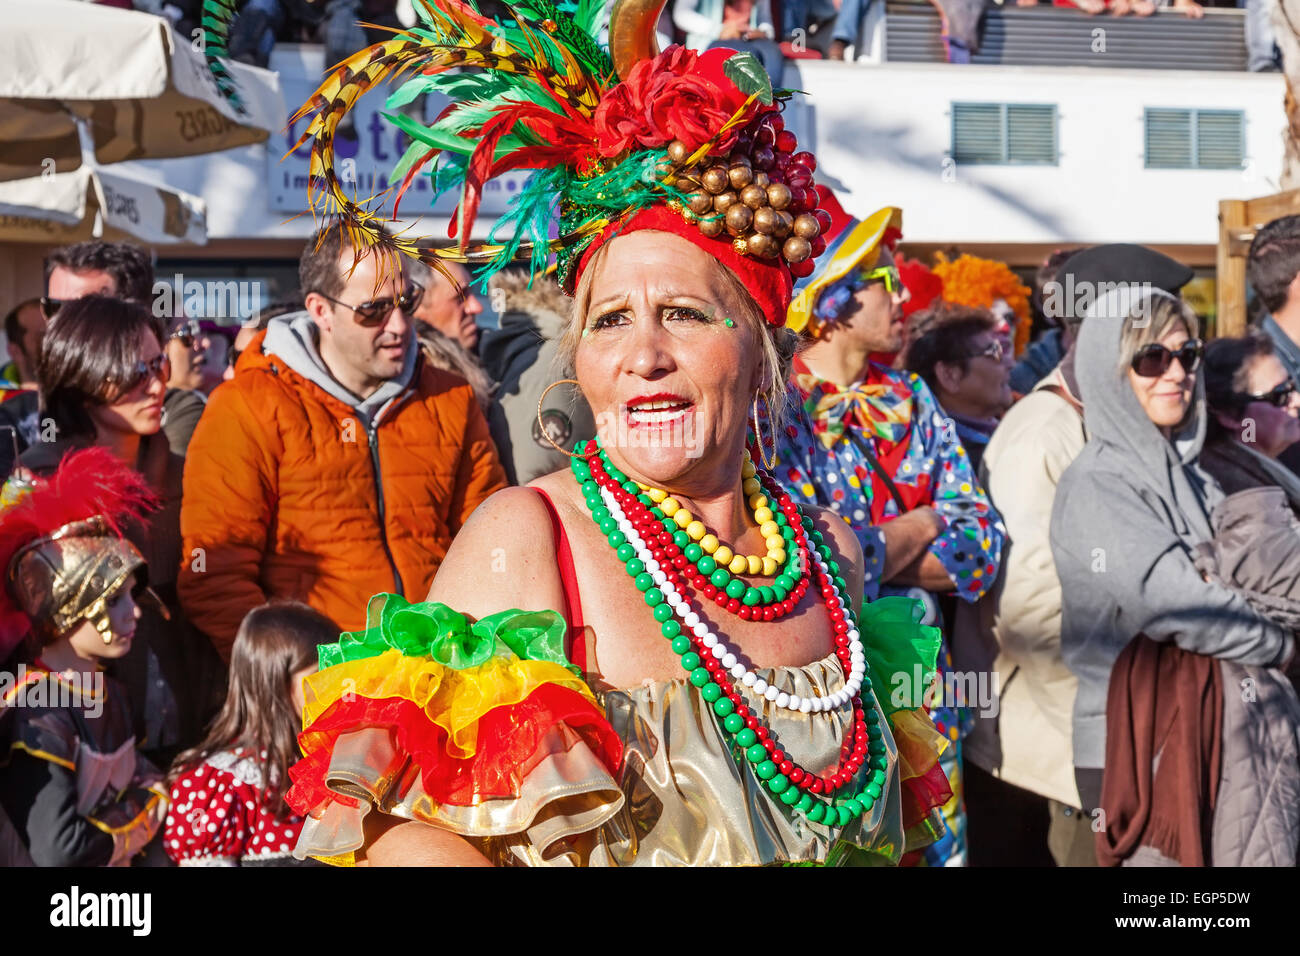 The Baianas, one of the most historically important characters of the Rio de Janeiro Brazilian style Carnaval Parade Stock Photo